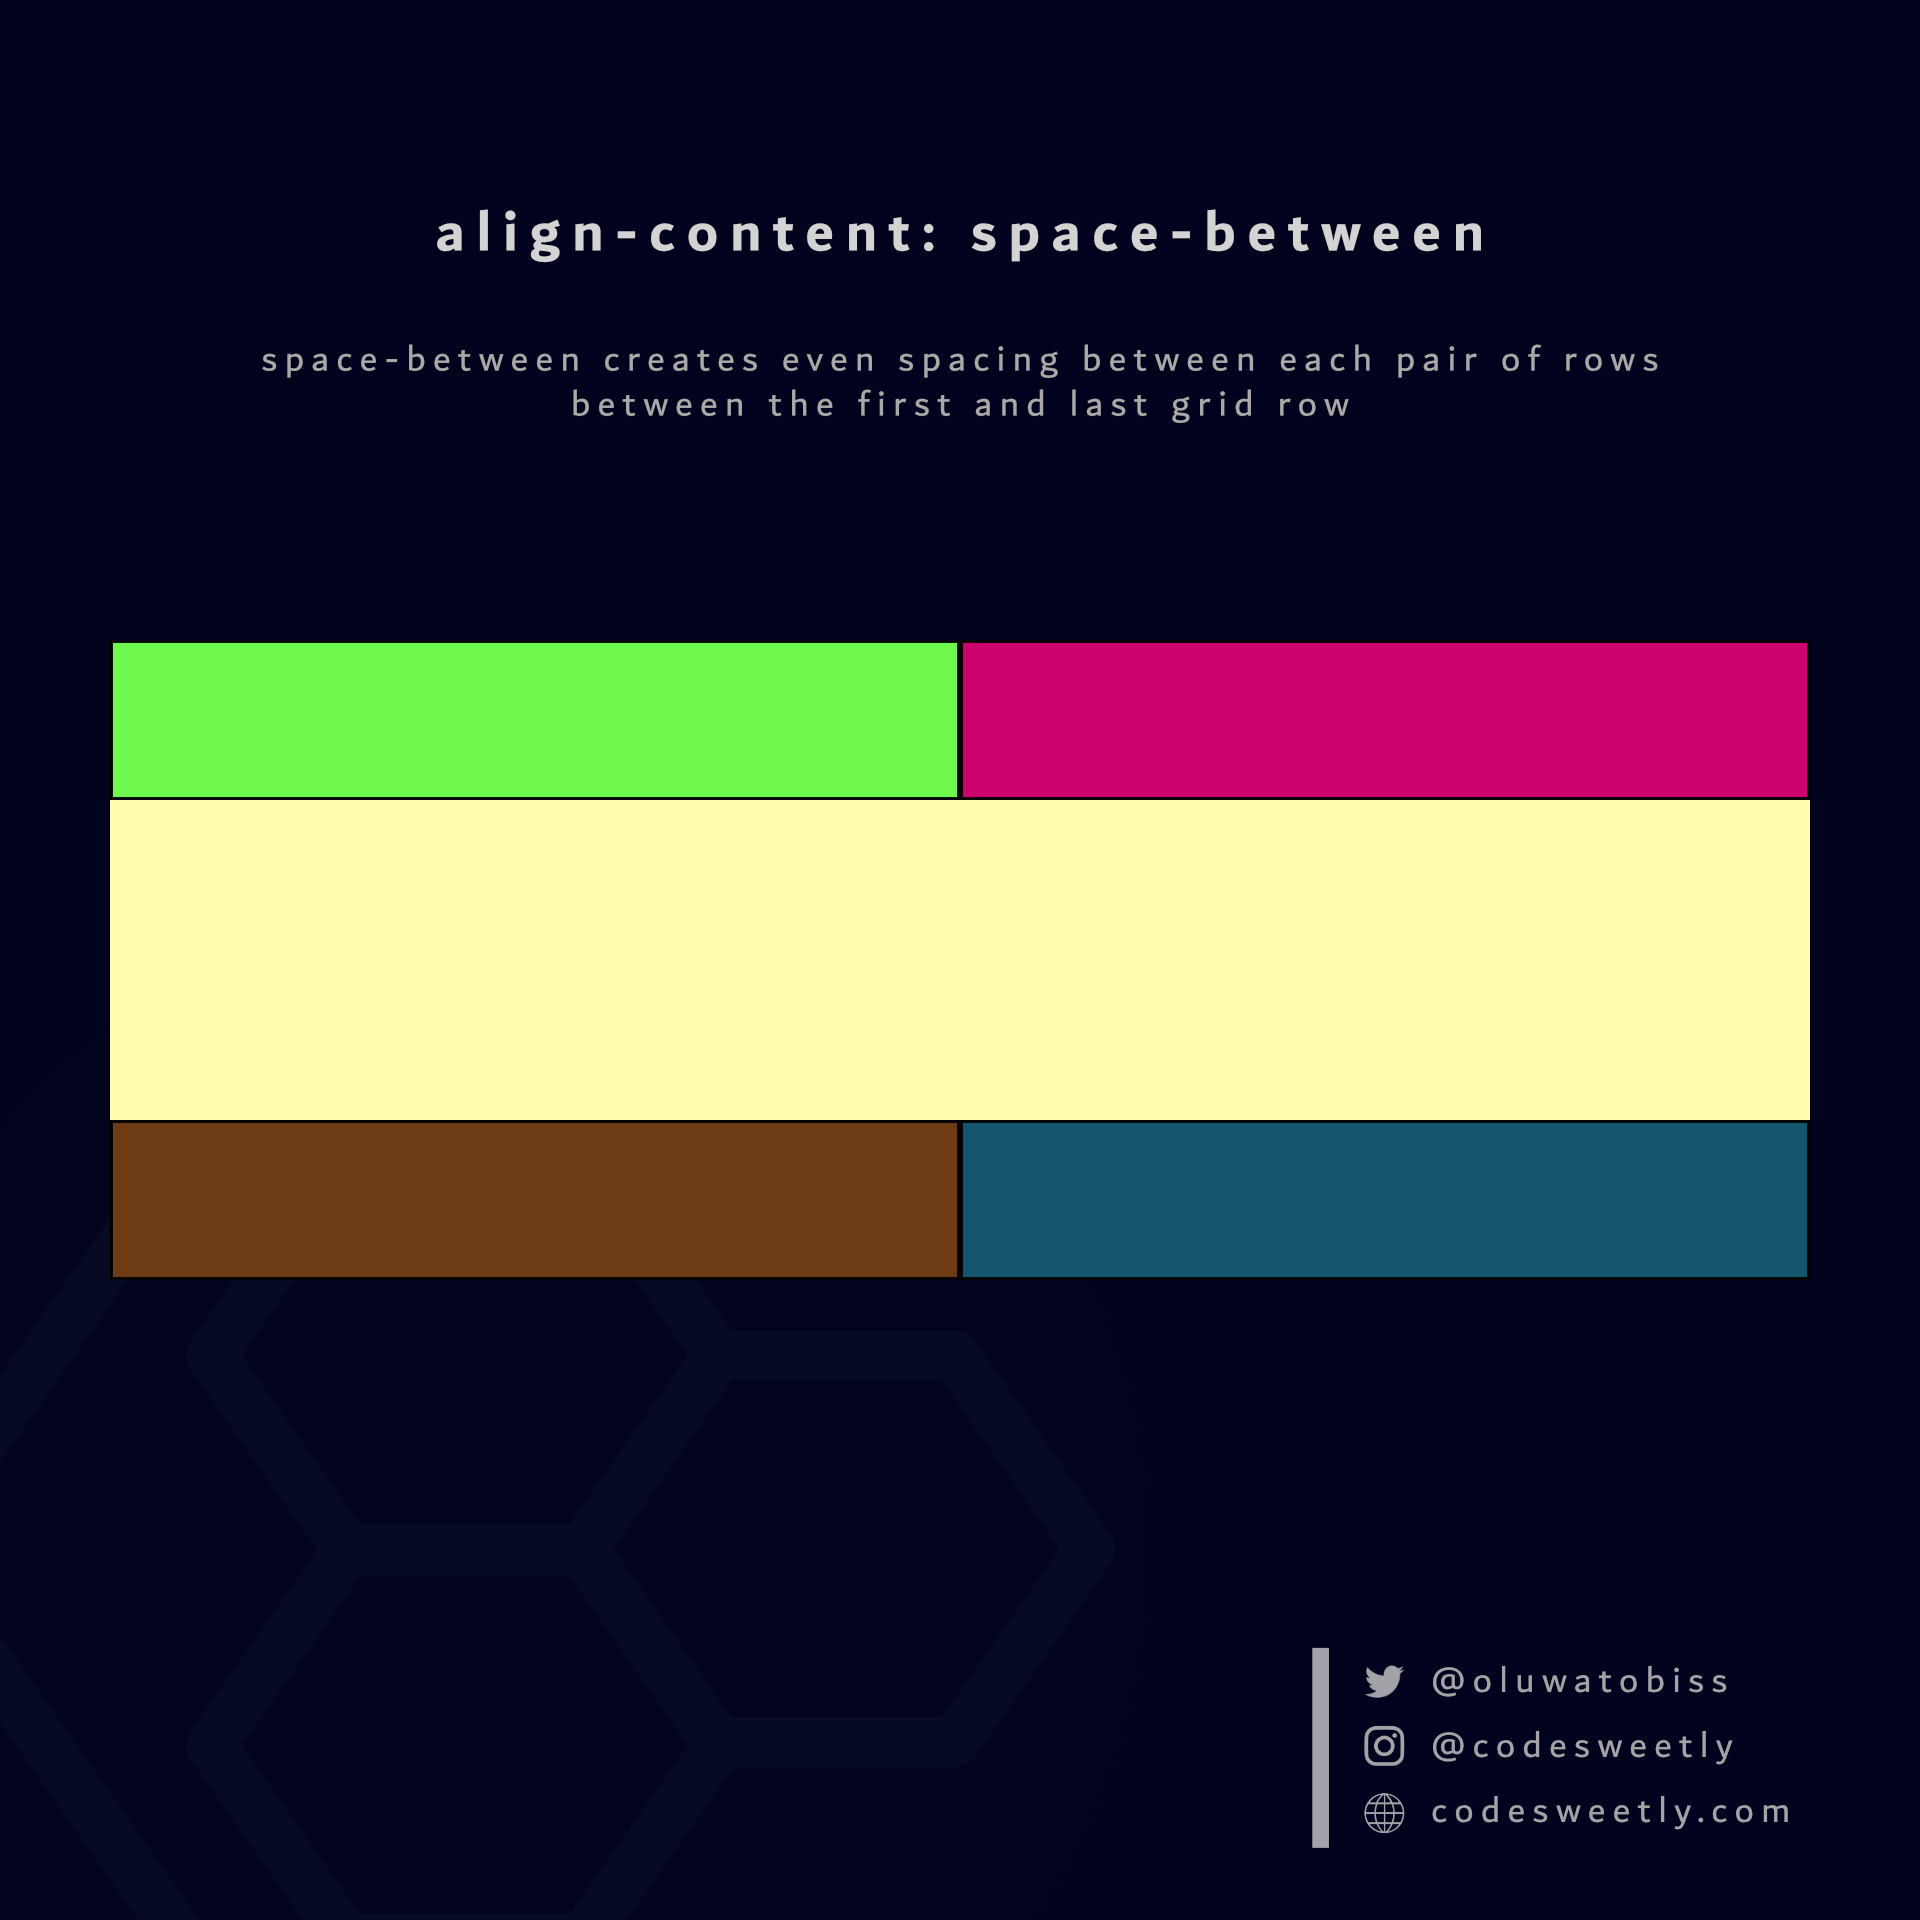 Illustration of align-content&#39;s space-between value in CSS
Grid